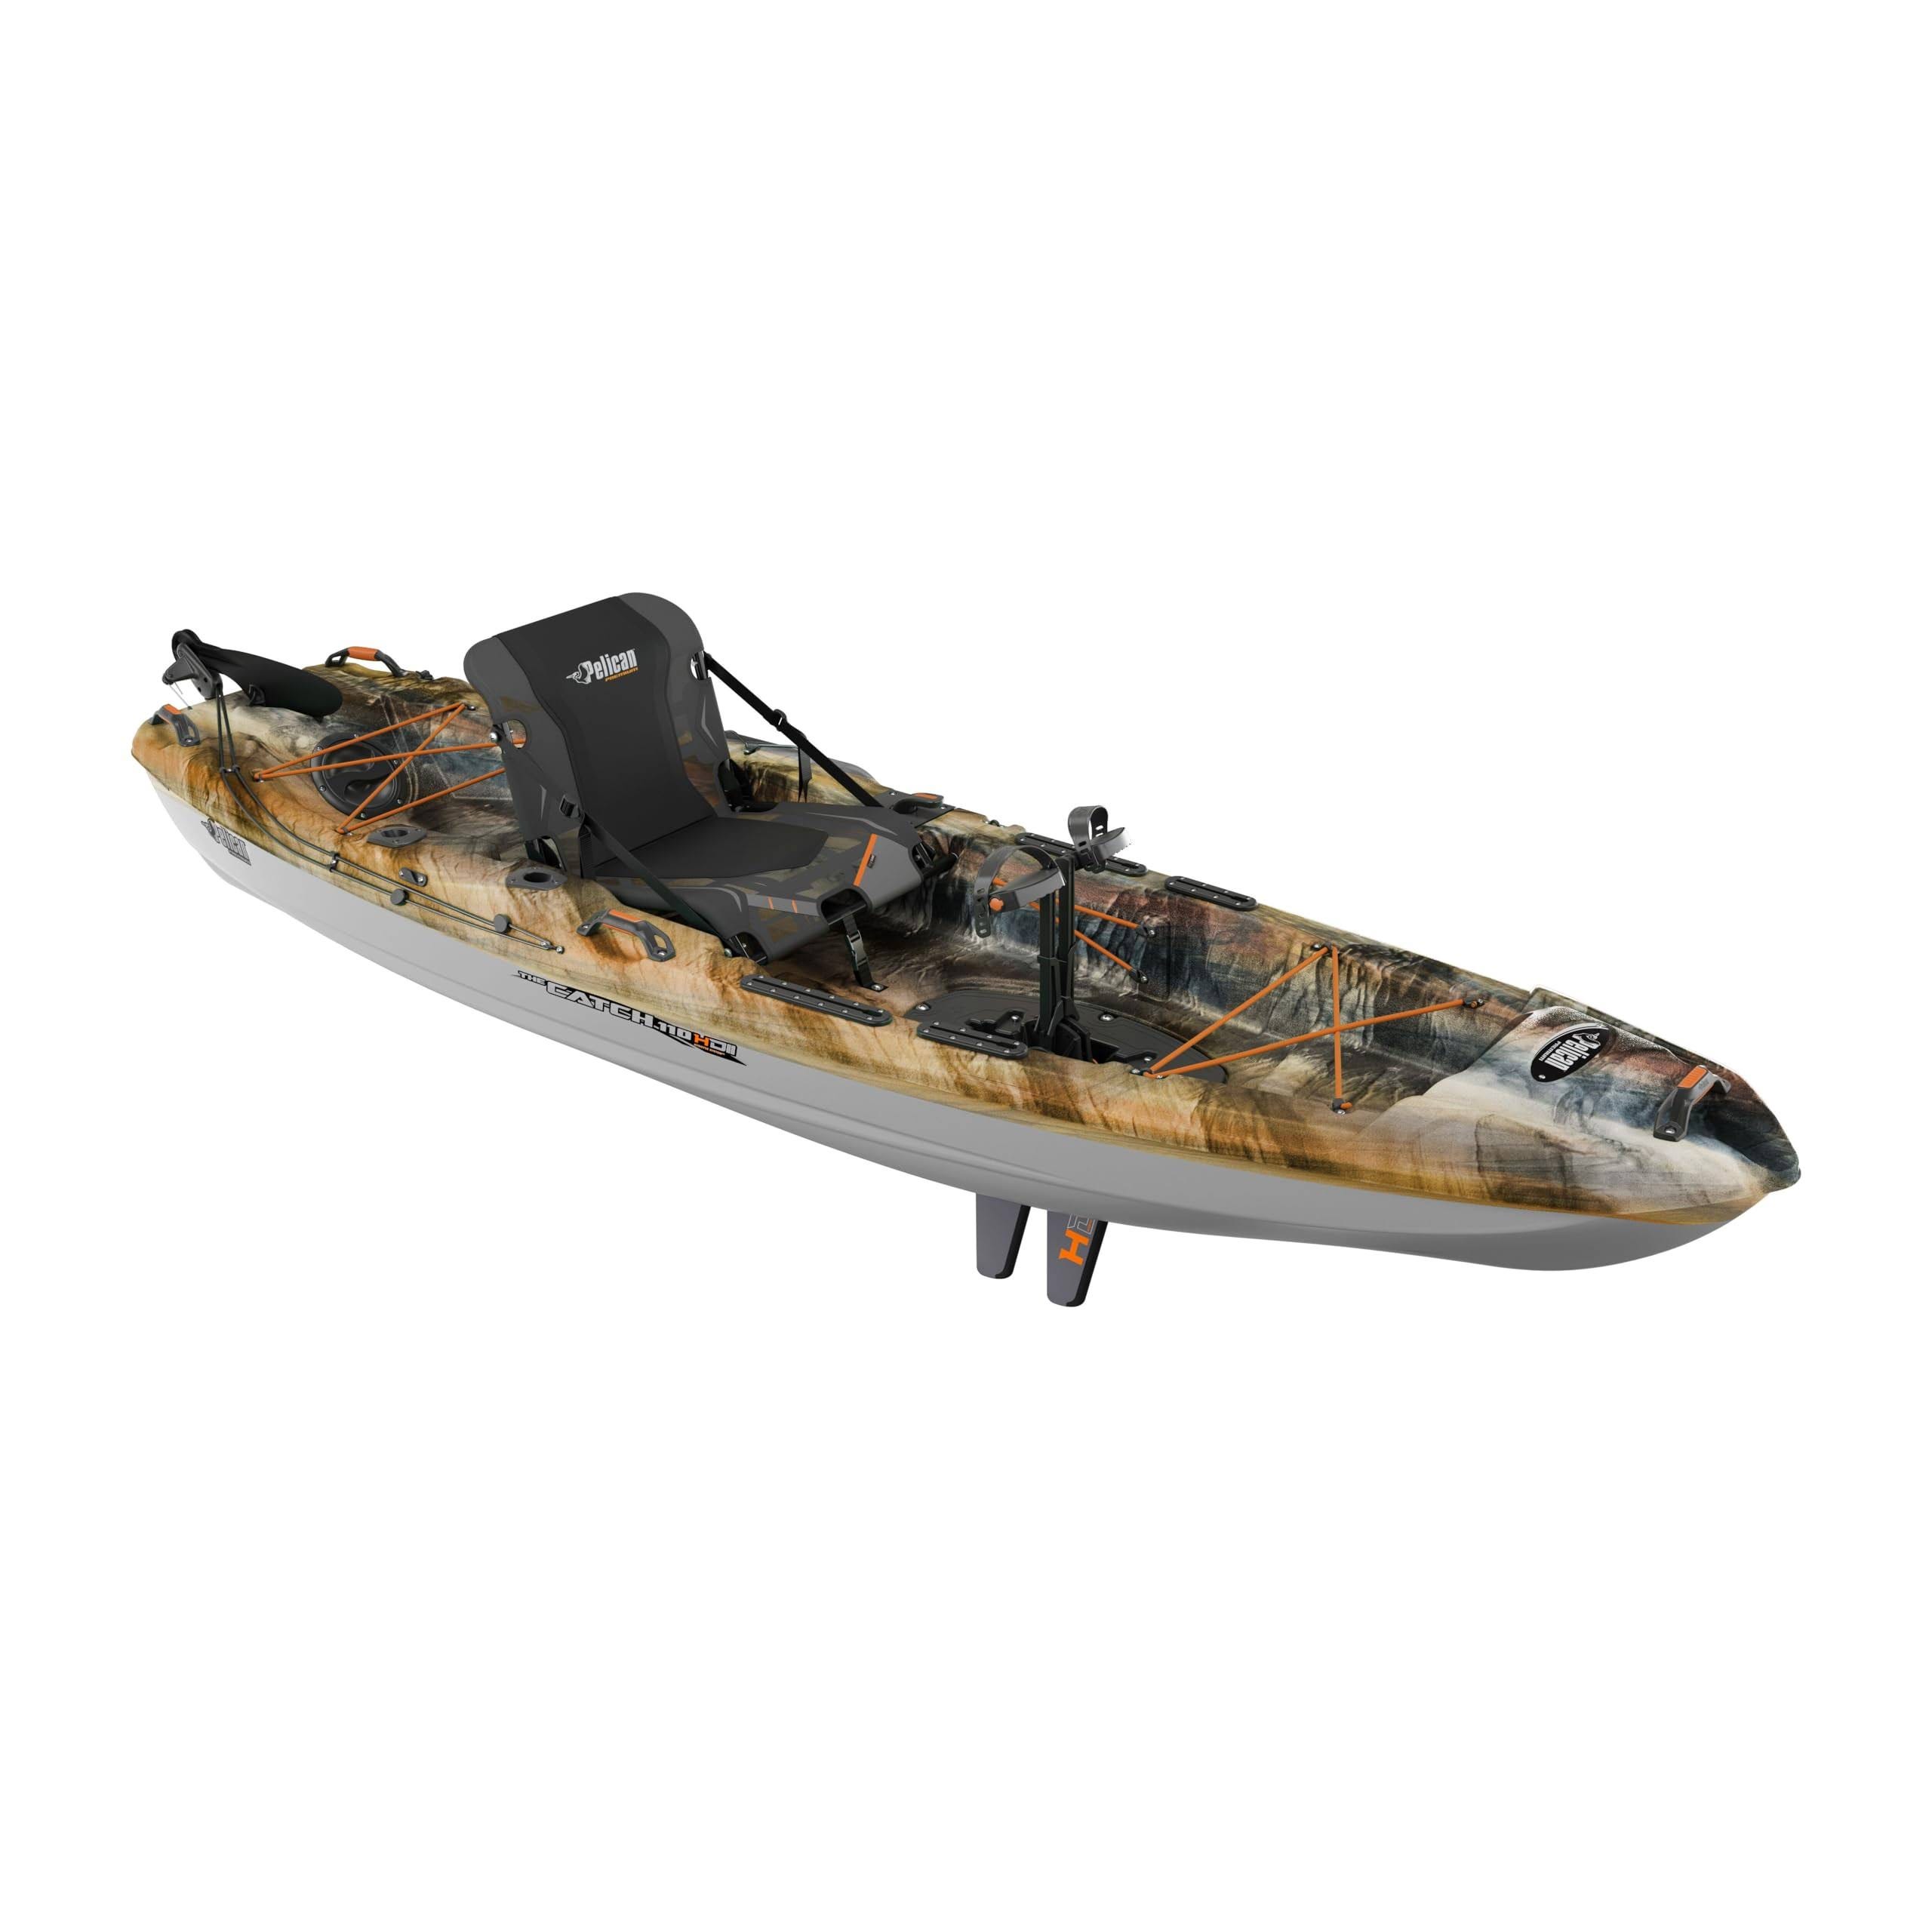 Pelican Outback 10 ft Sit-On-Top Fishing Kayak with Hydryve Pedal System and Ergocast Seat | Image